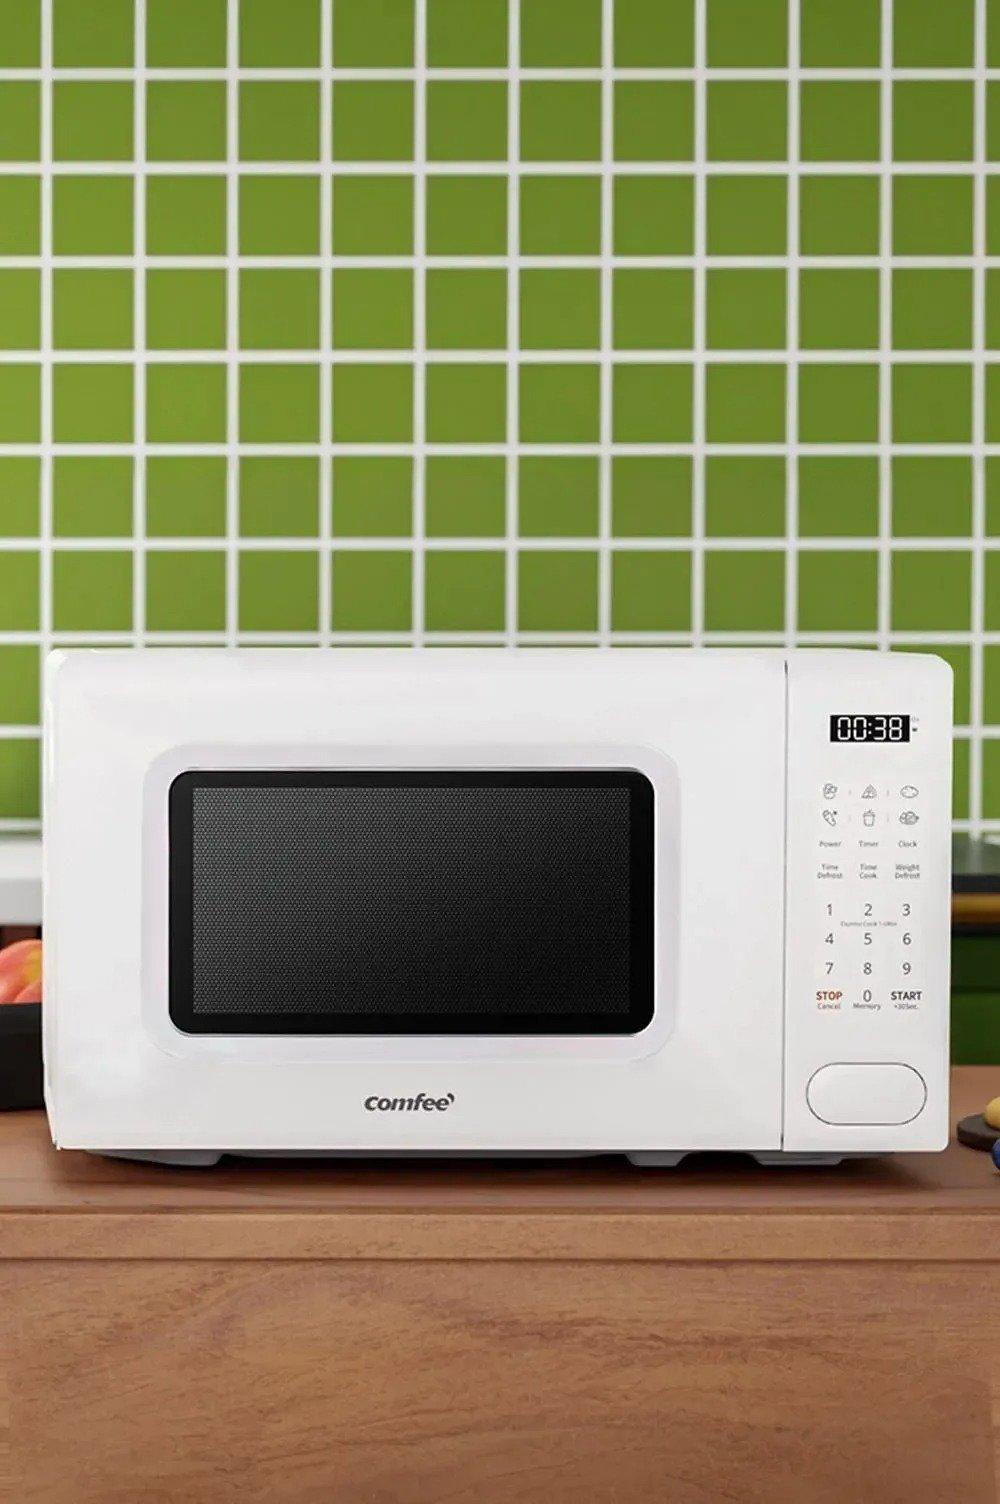 Comfee 700w 20L Digital Microwave Oven with 6 Cooking Presets, Express Cook, 11 Power Levels, Defros